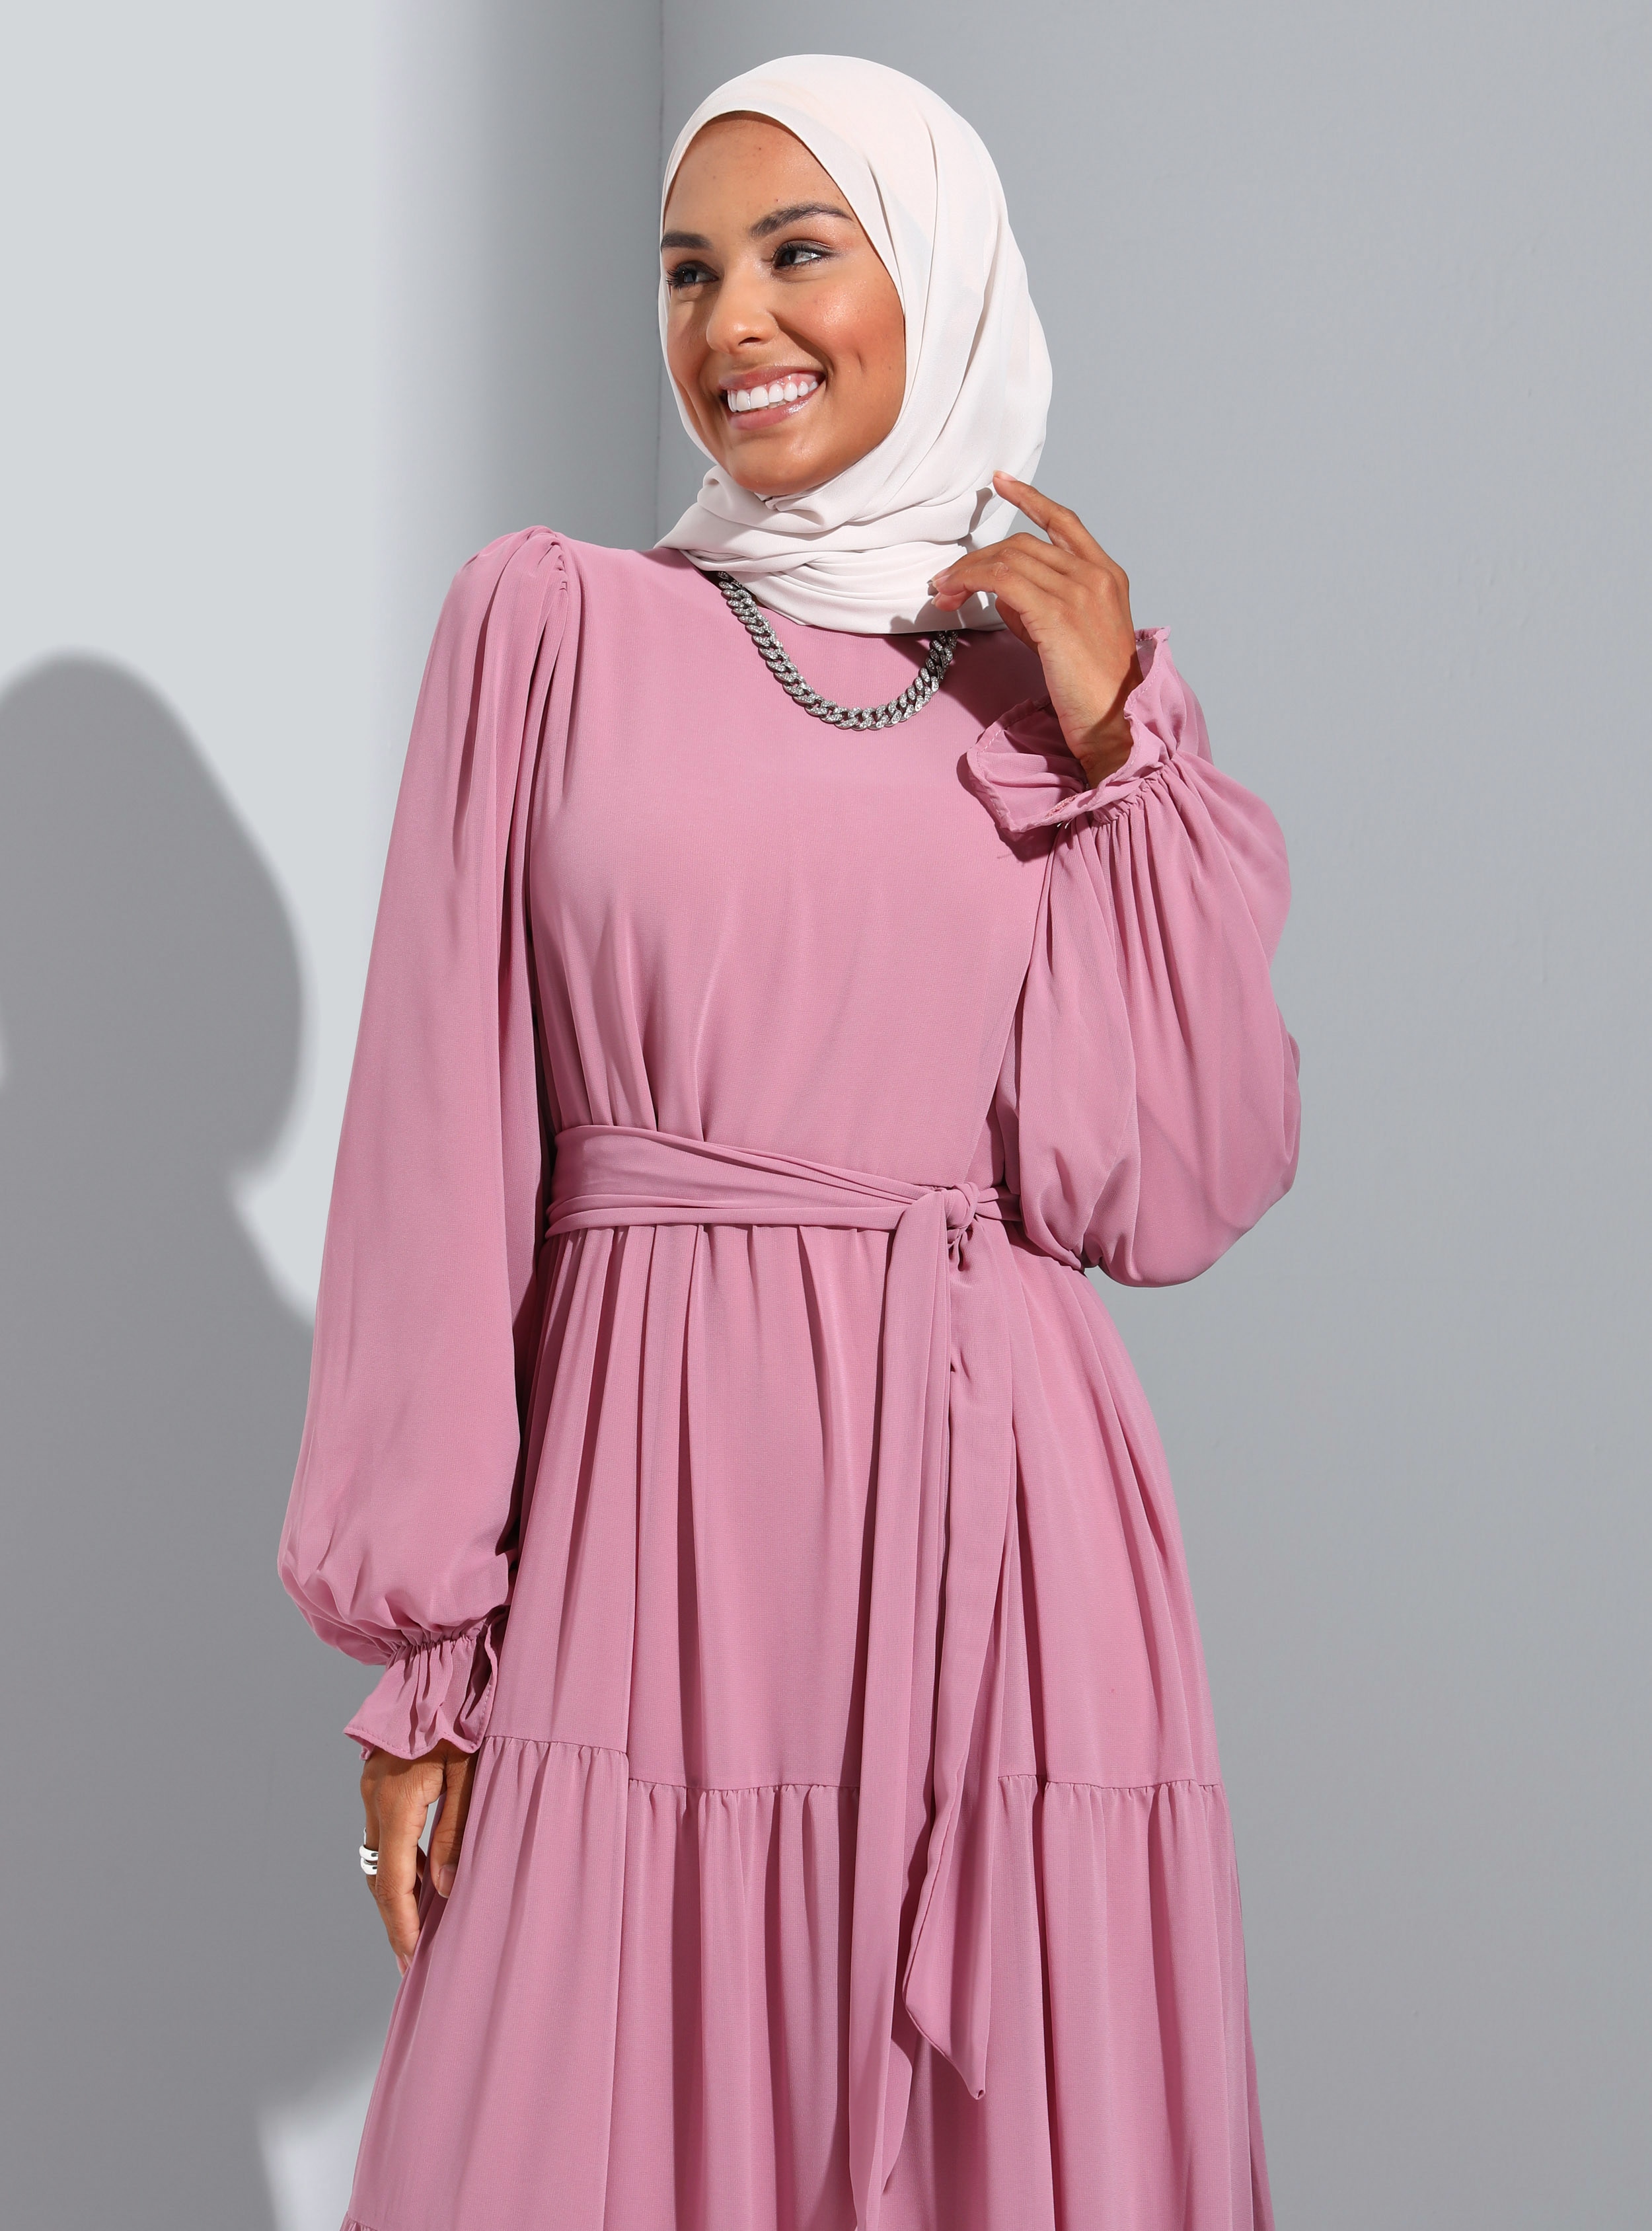 Dusty Rose - Crew neck - Fully Lined - Modest Dress